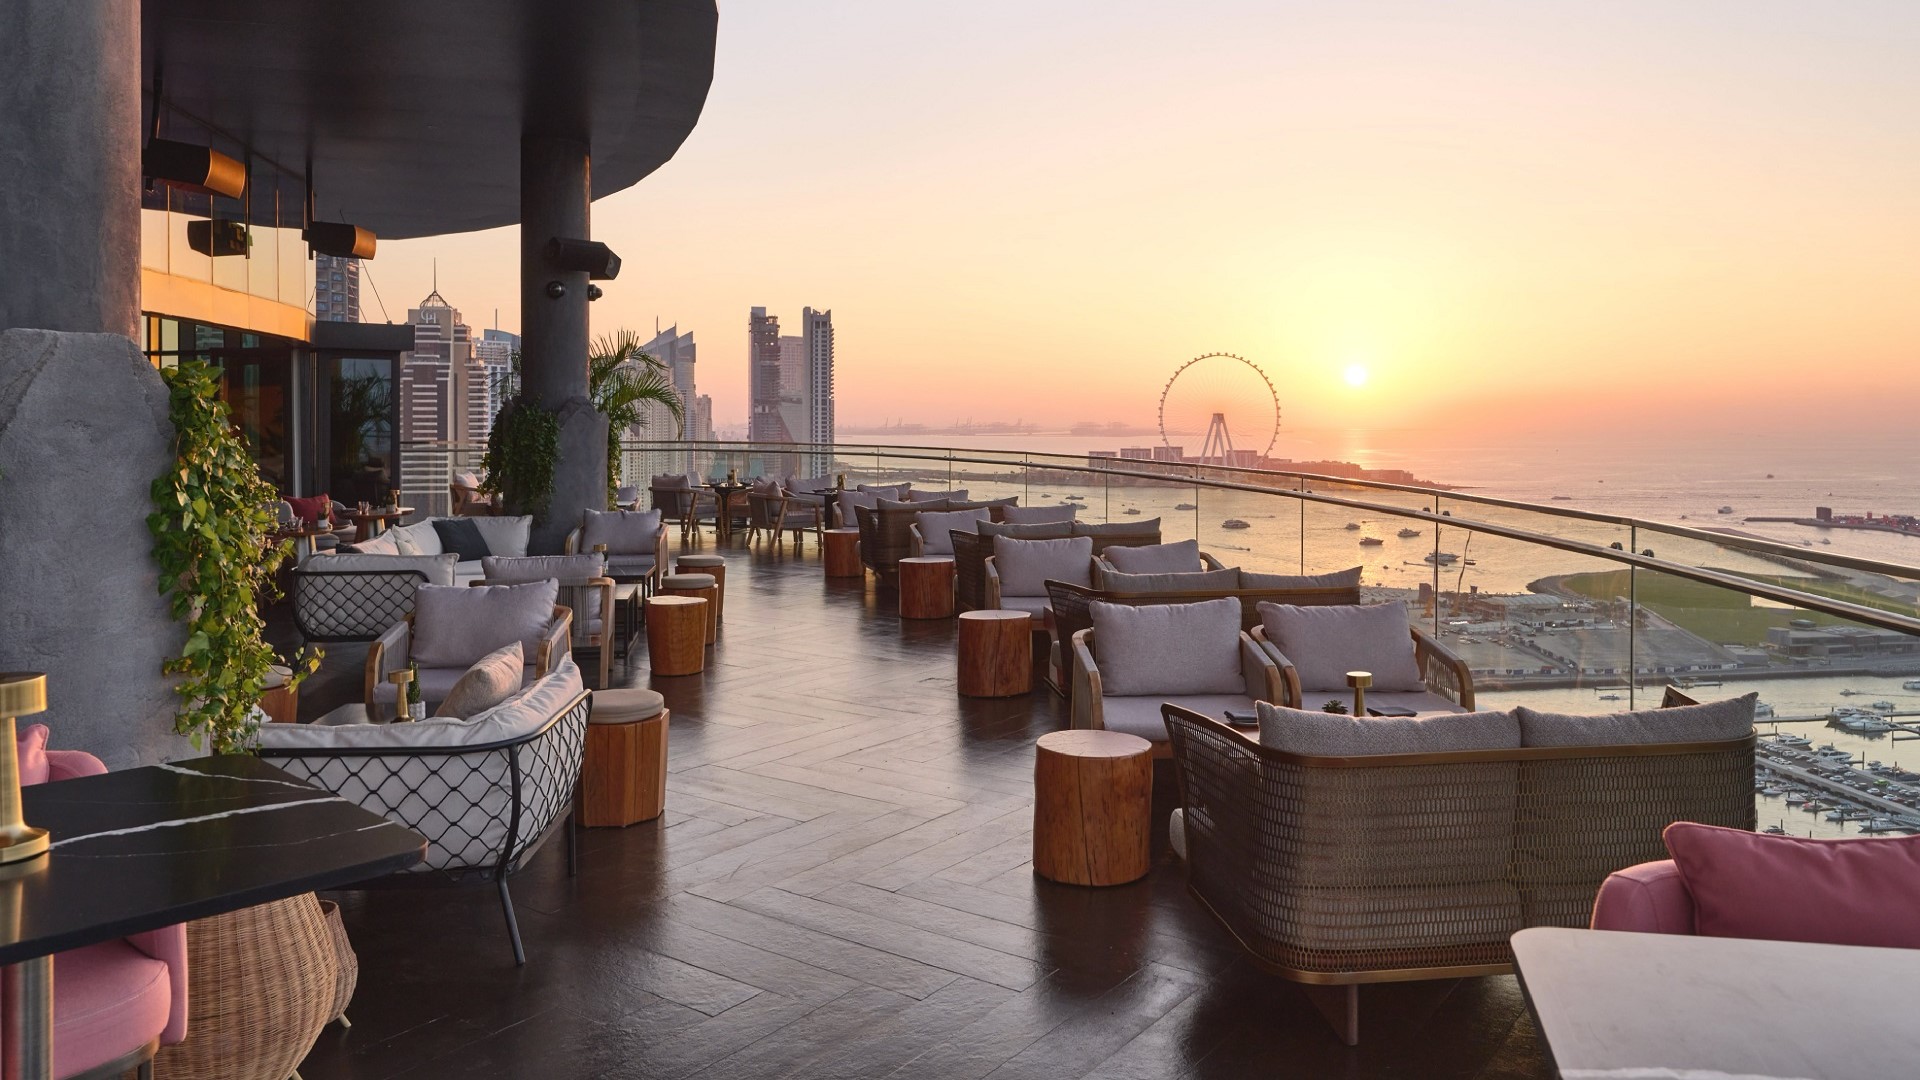 Take Elevated Sips at the 7 Best Rooftop Bars in Dubai